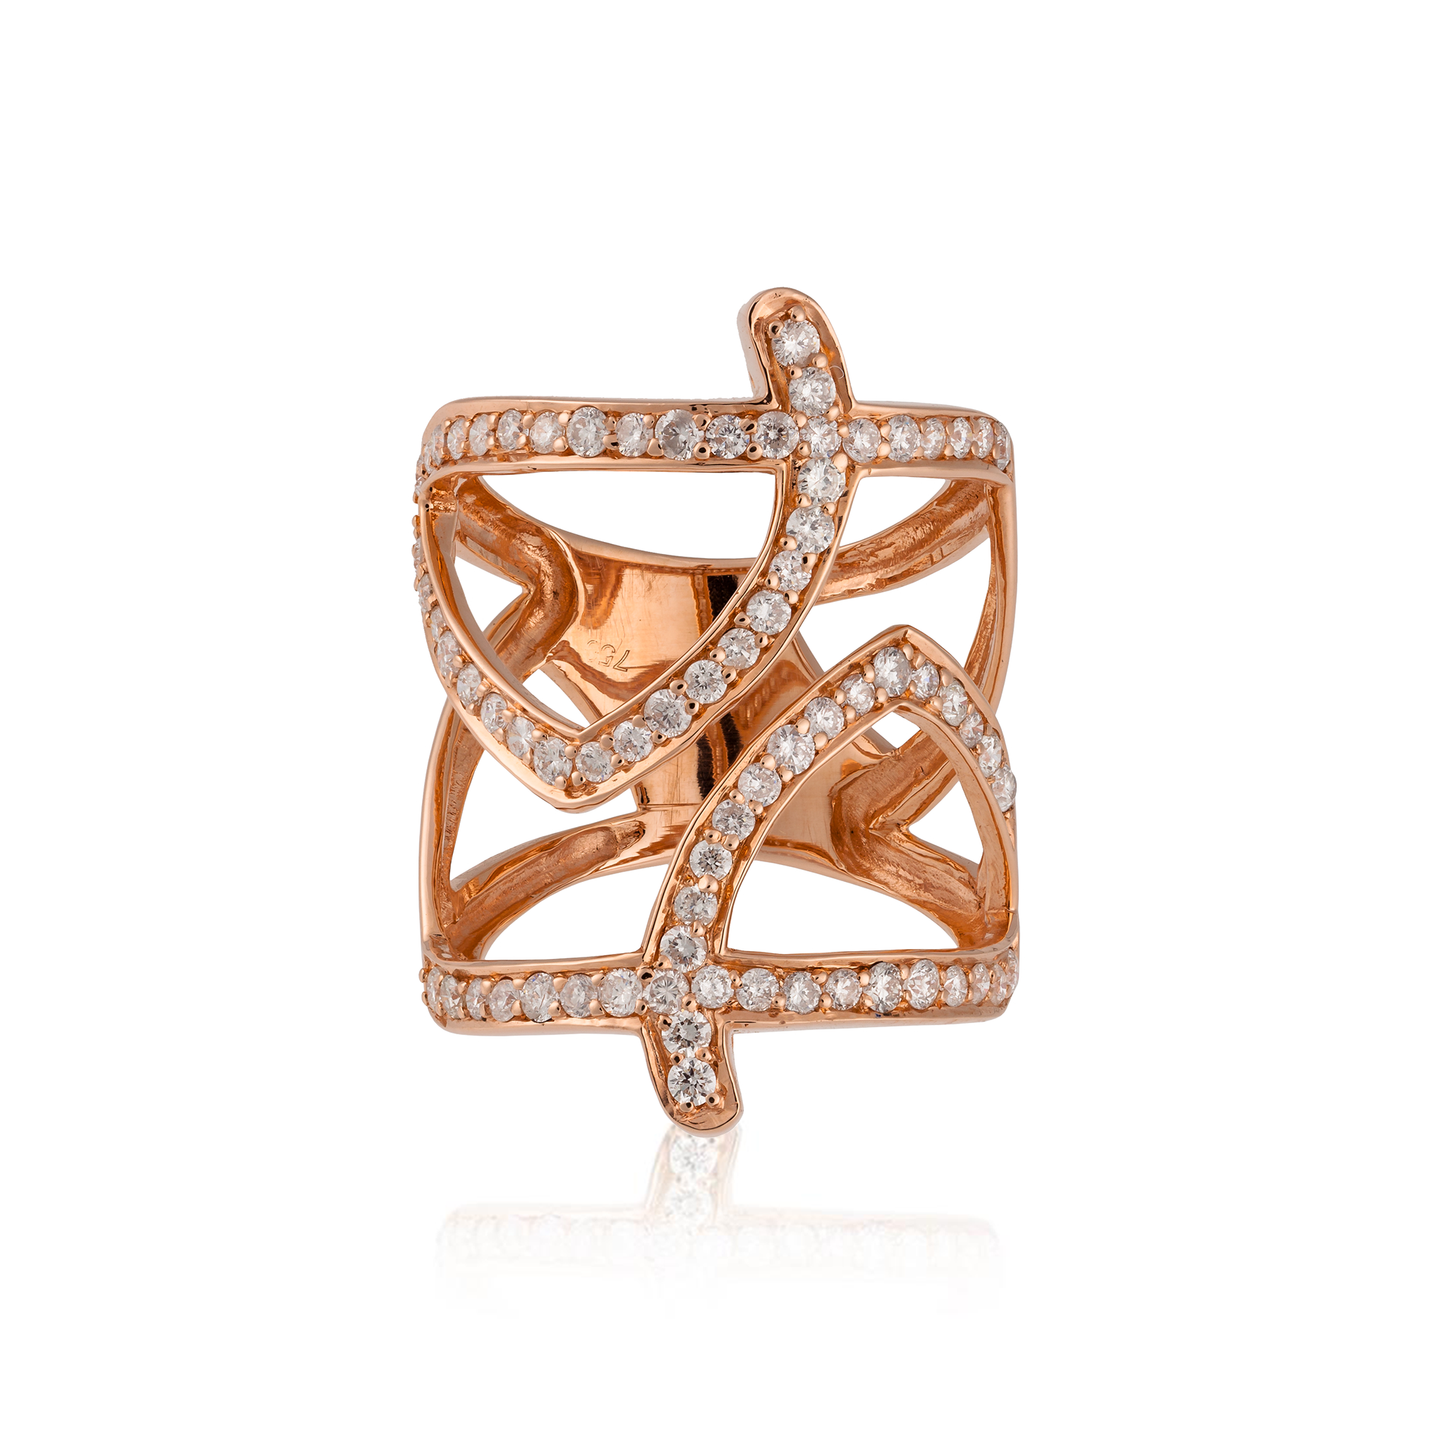 18KT Rose Gold Ring with Diamonds